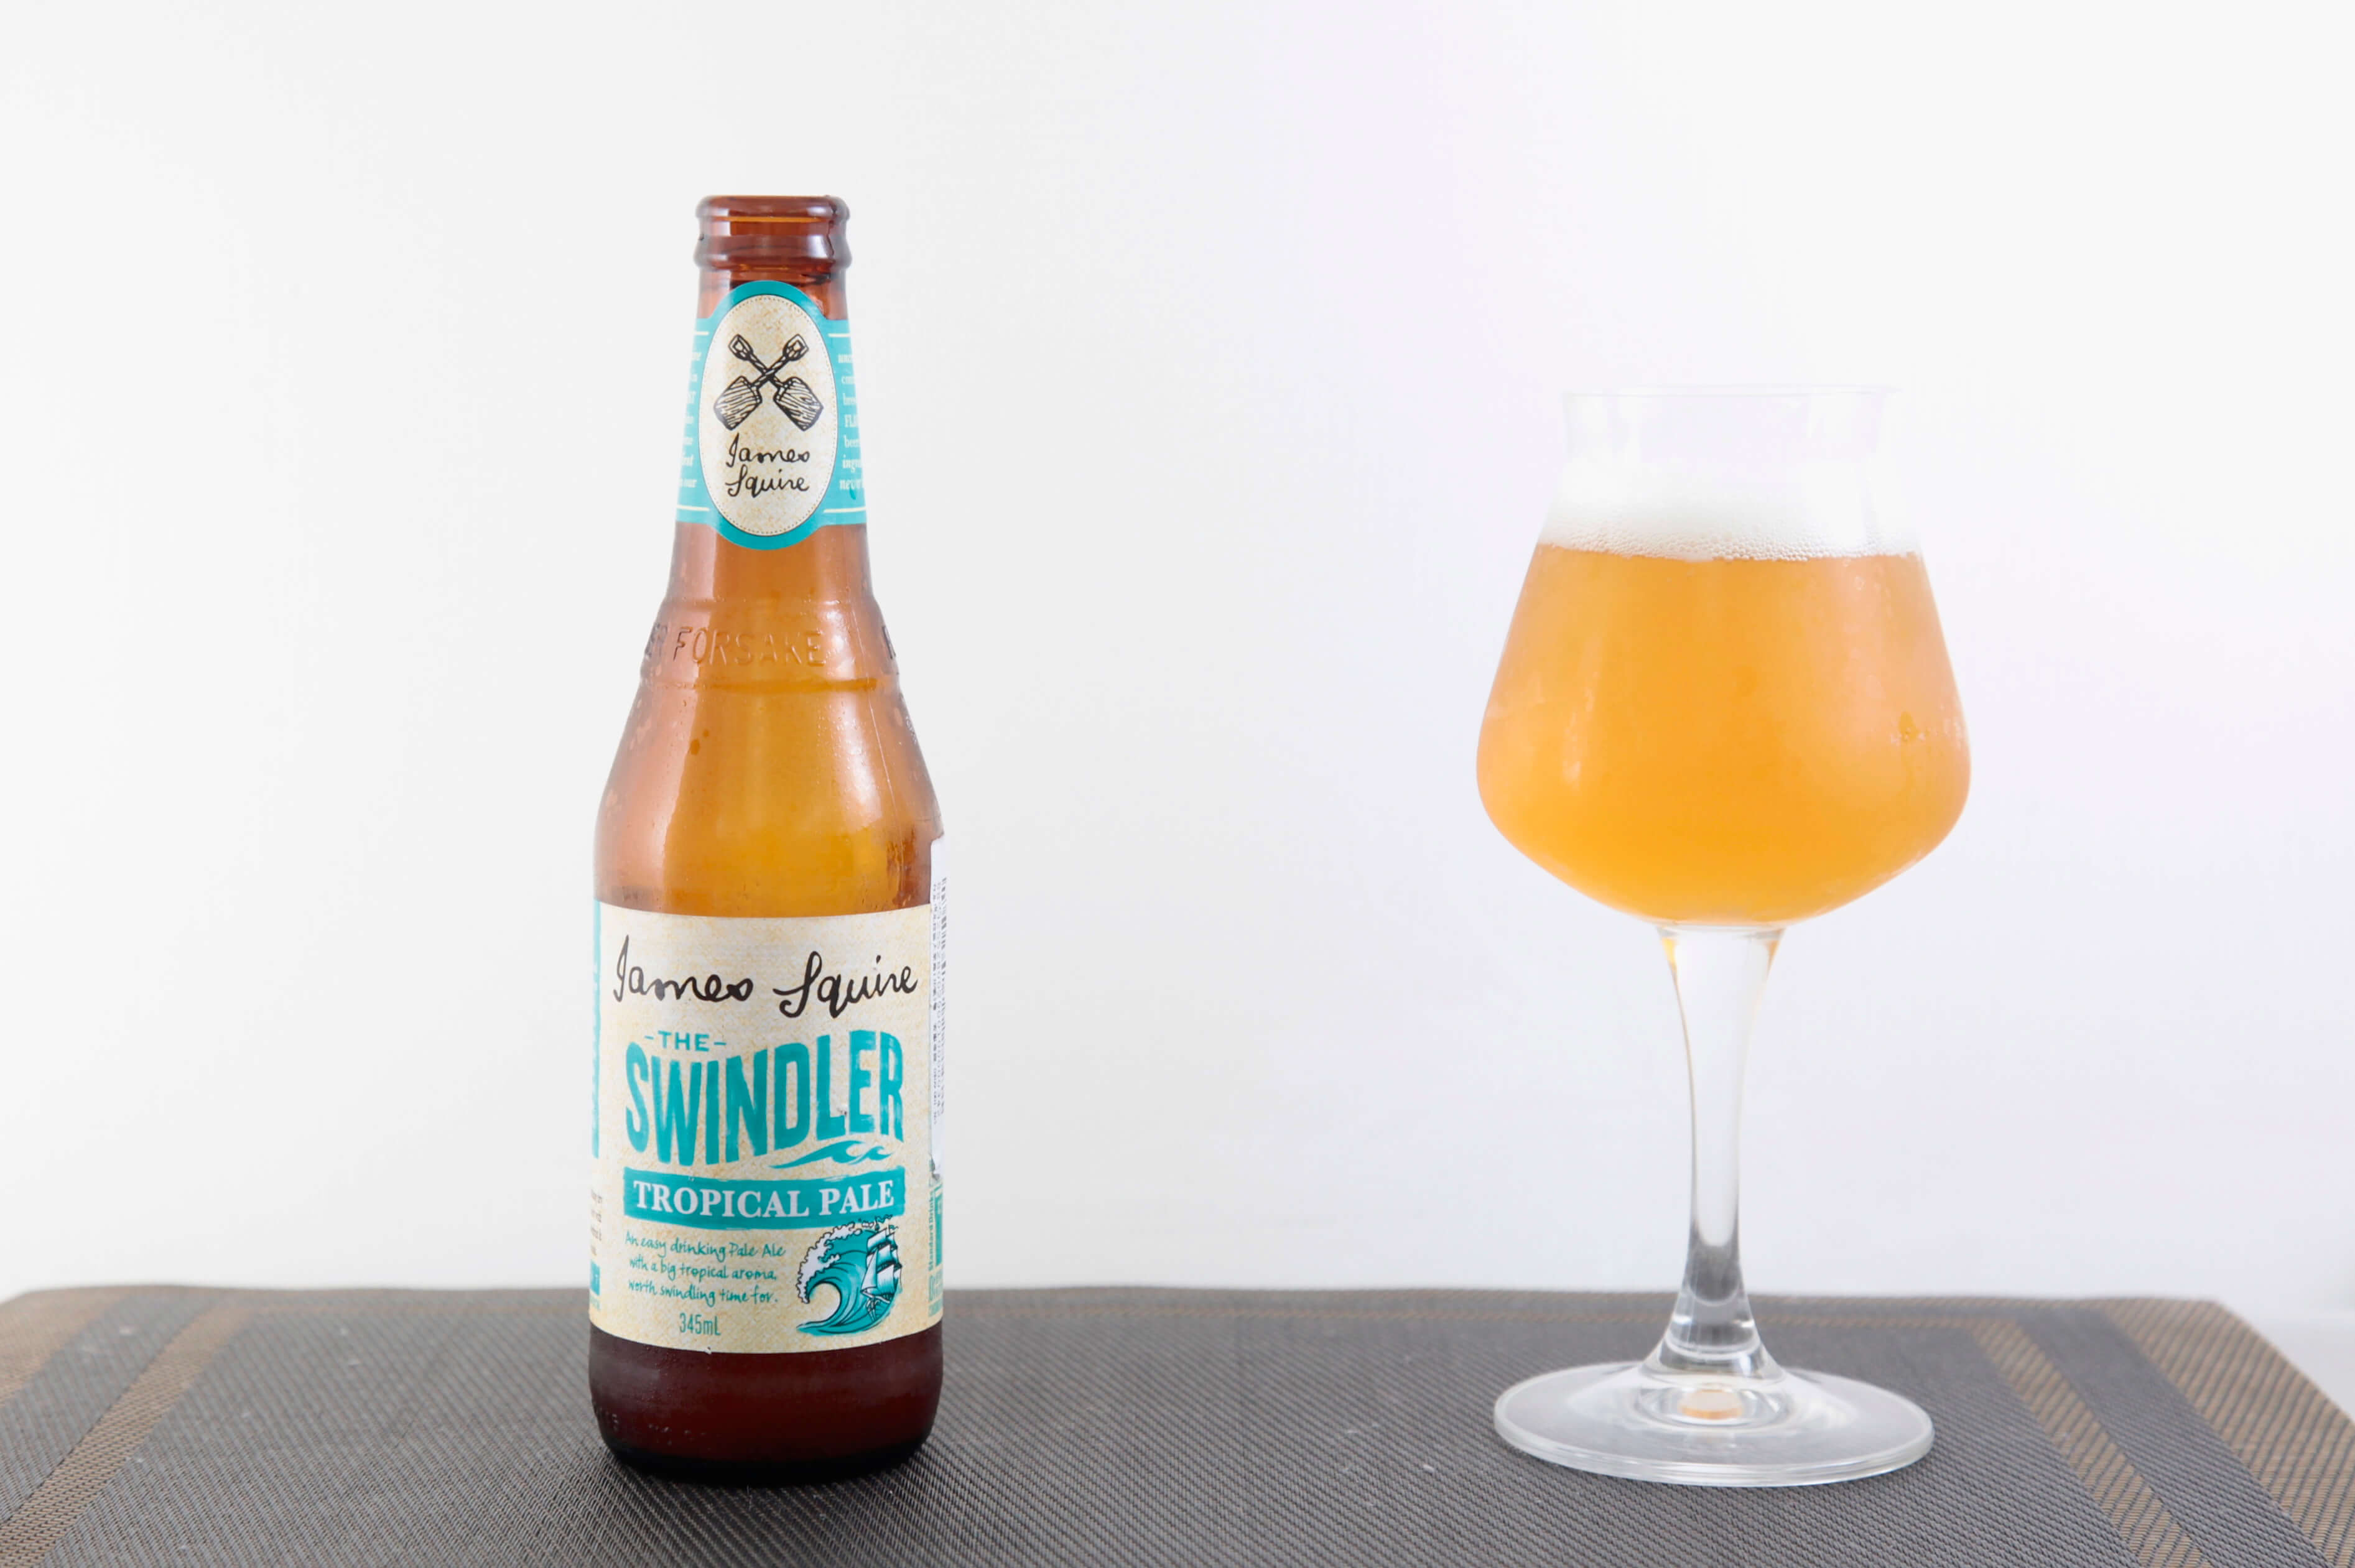 James Squire | The Swindler Tropical Ale 老千啤酒